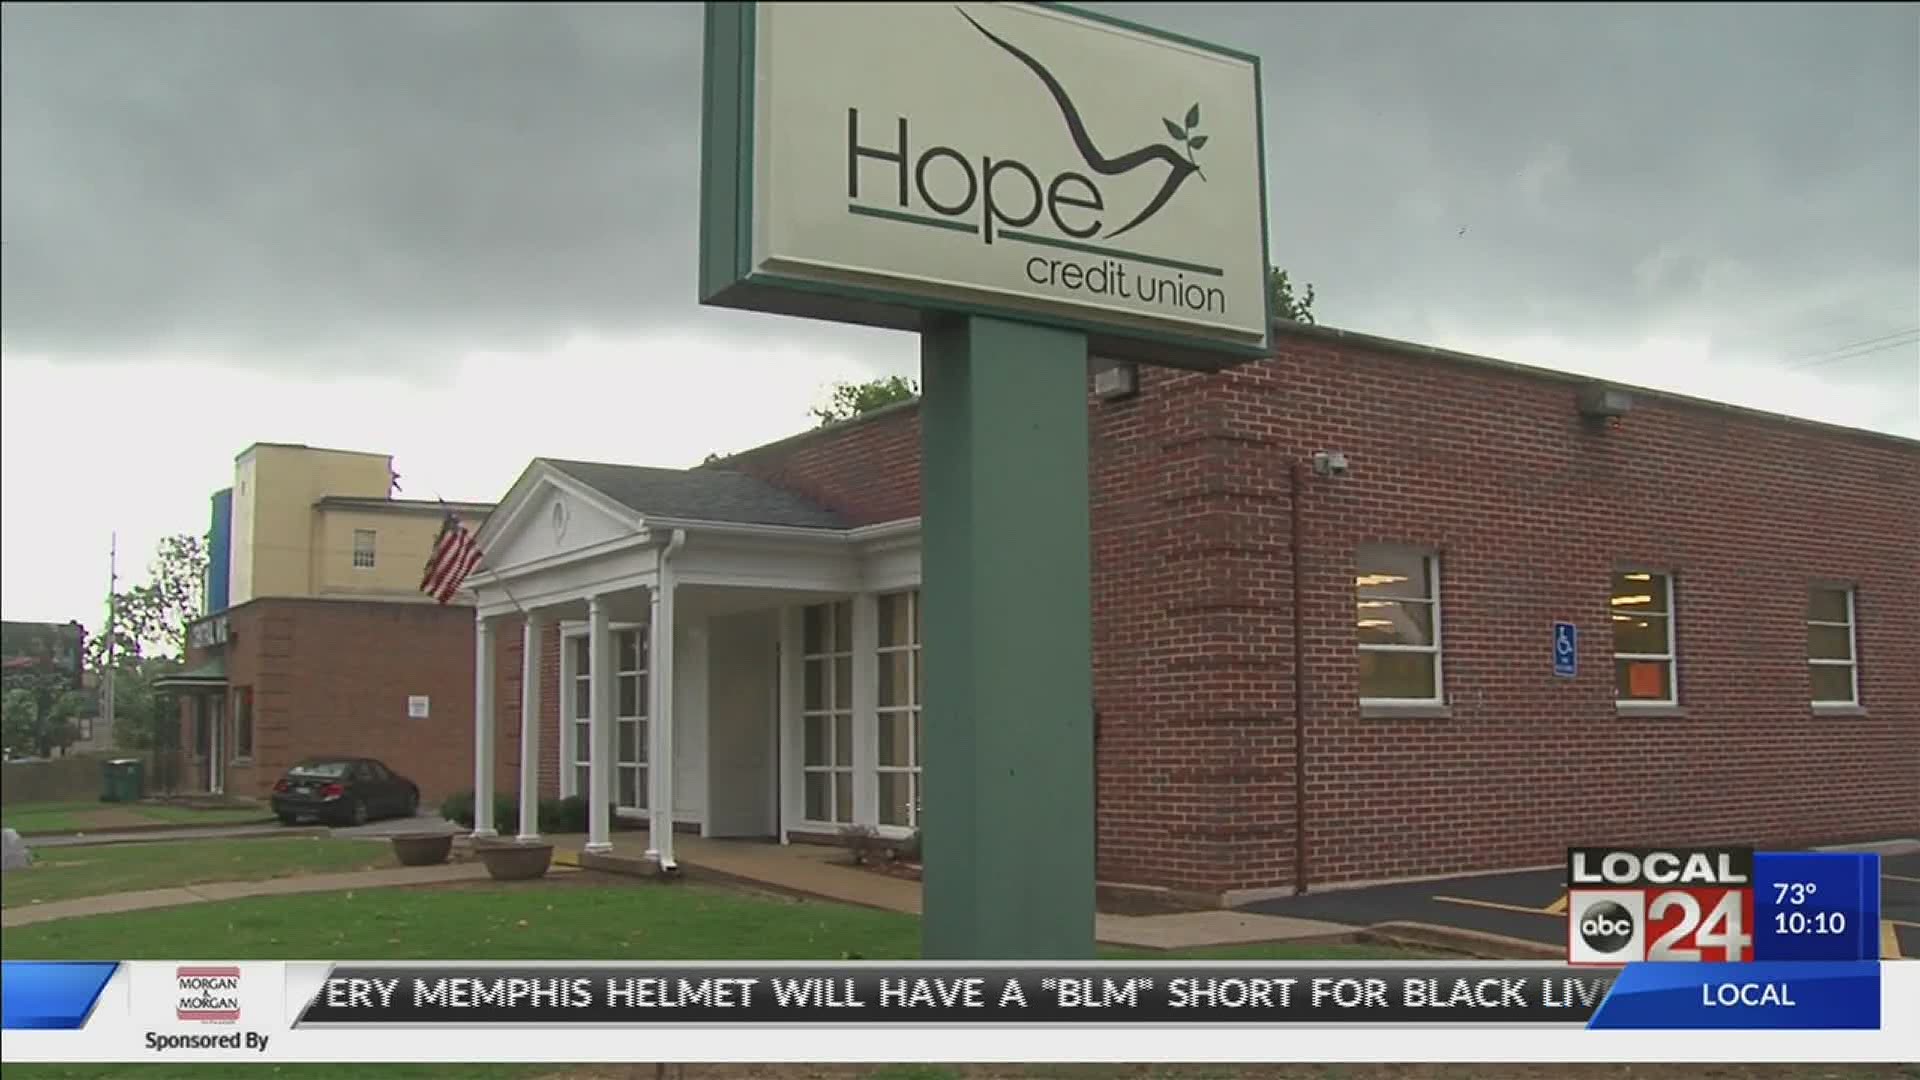 Hope Credit Union based in Mississippi has received a $10 million donation from the video streaming company